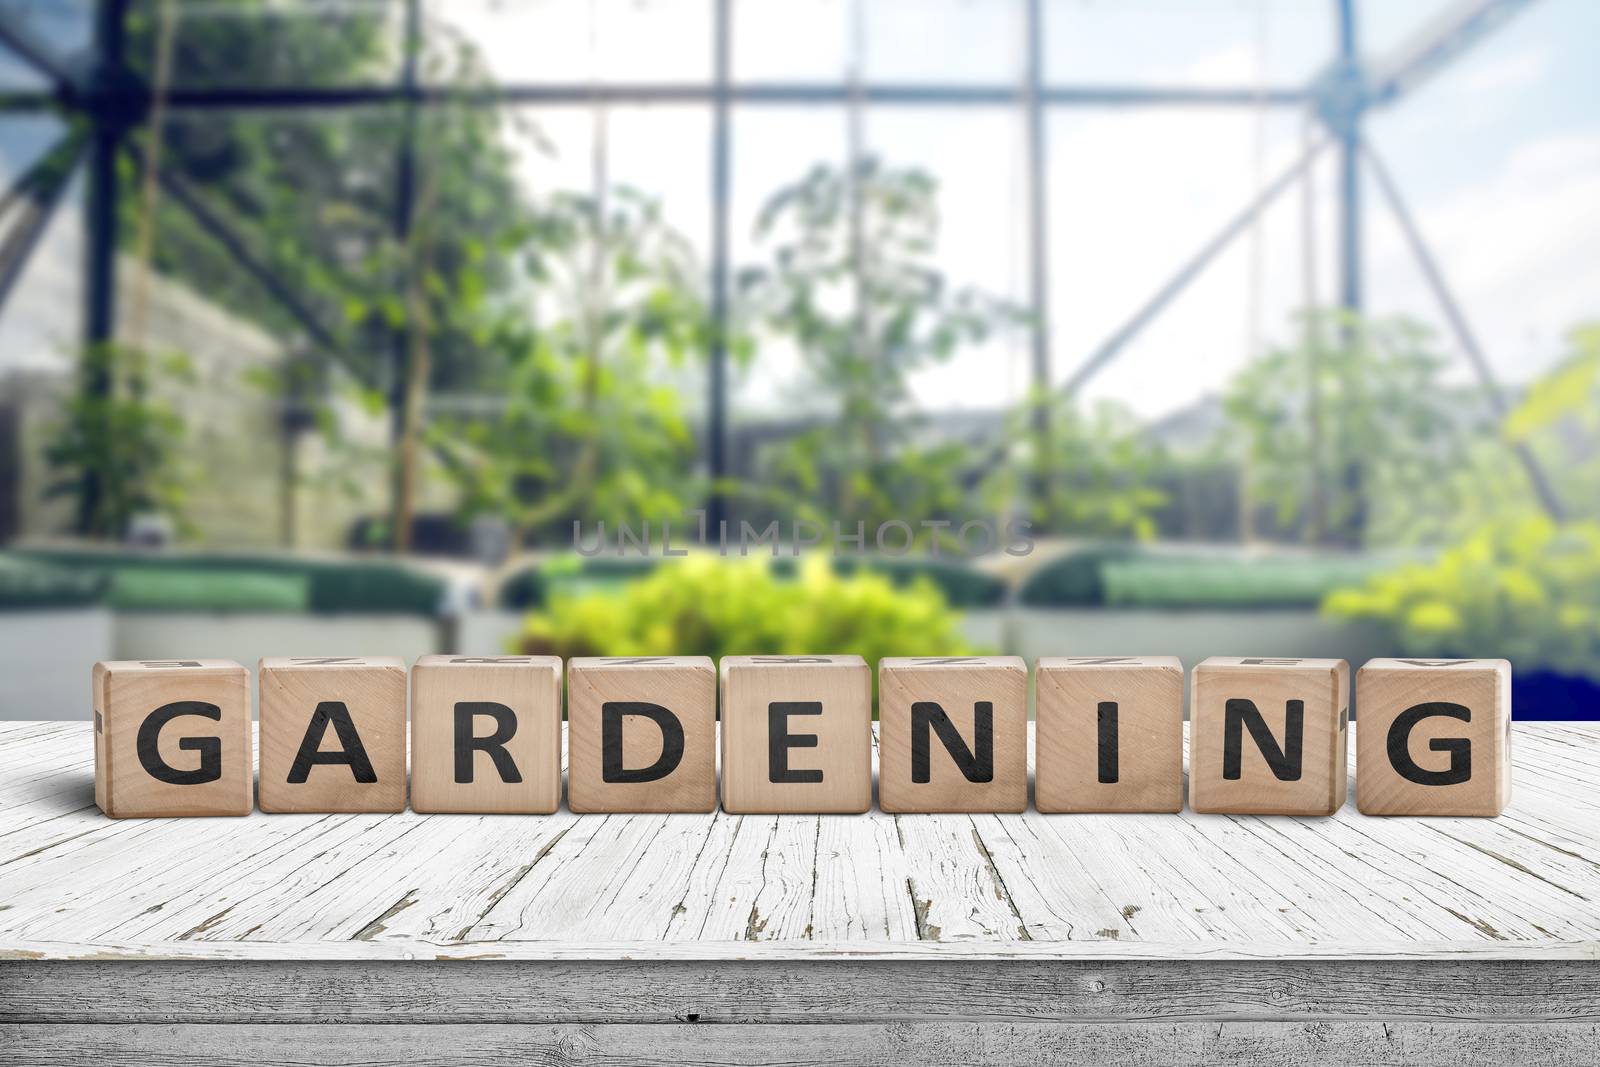 Gardening sign in a green house on a wooden table in bright light in the springtime